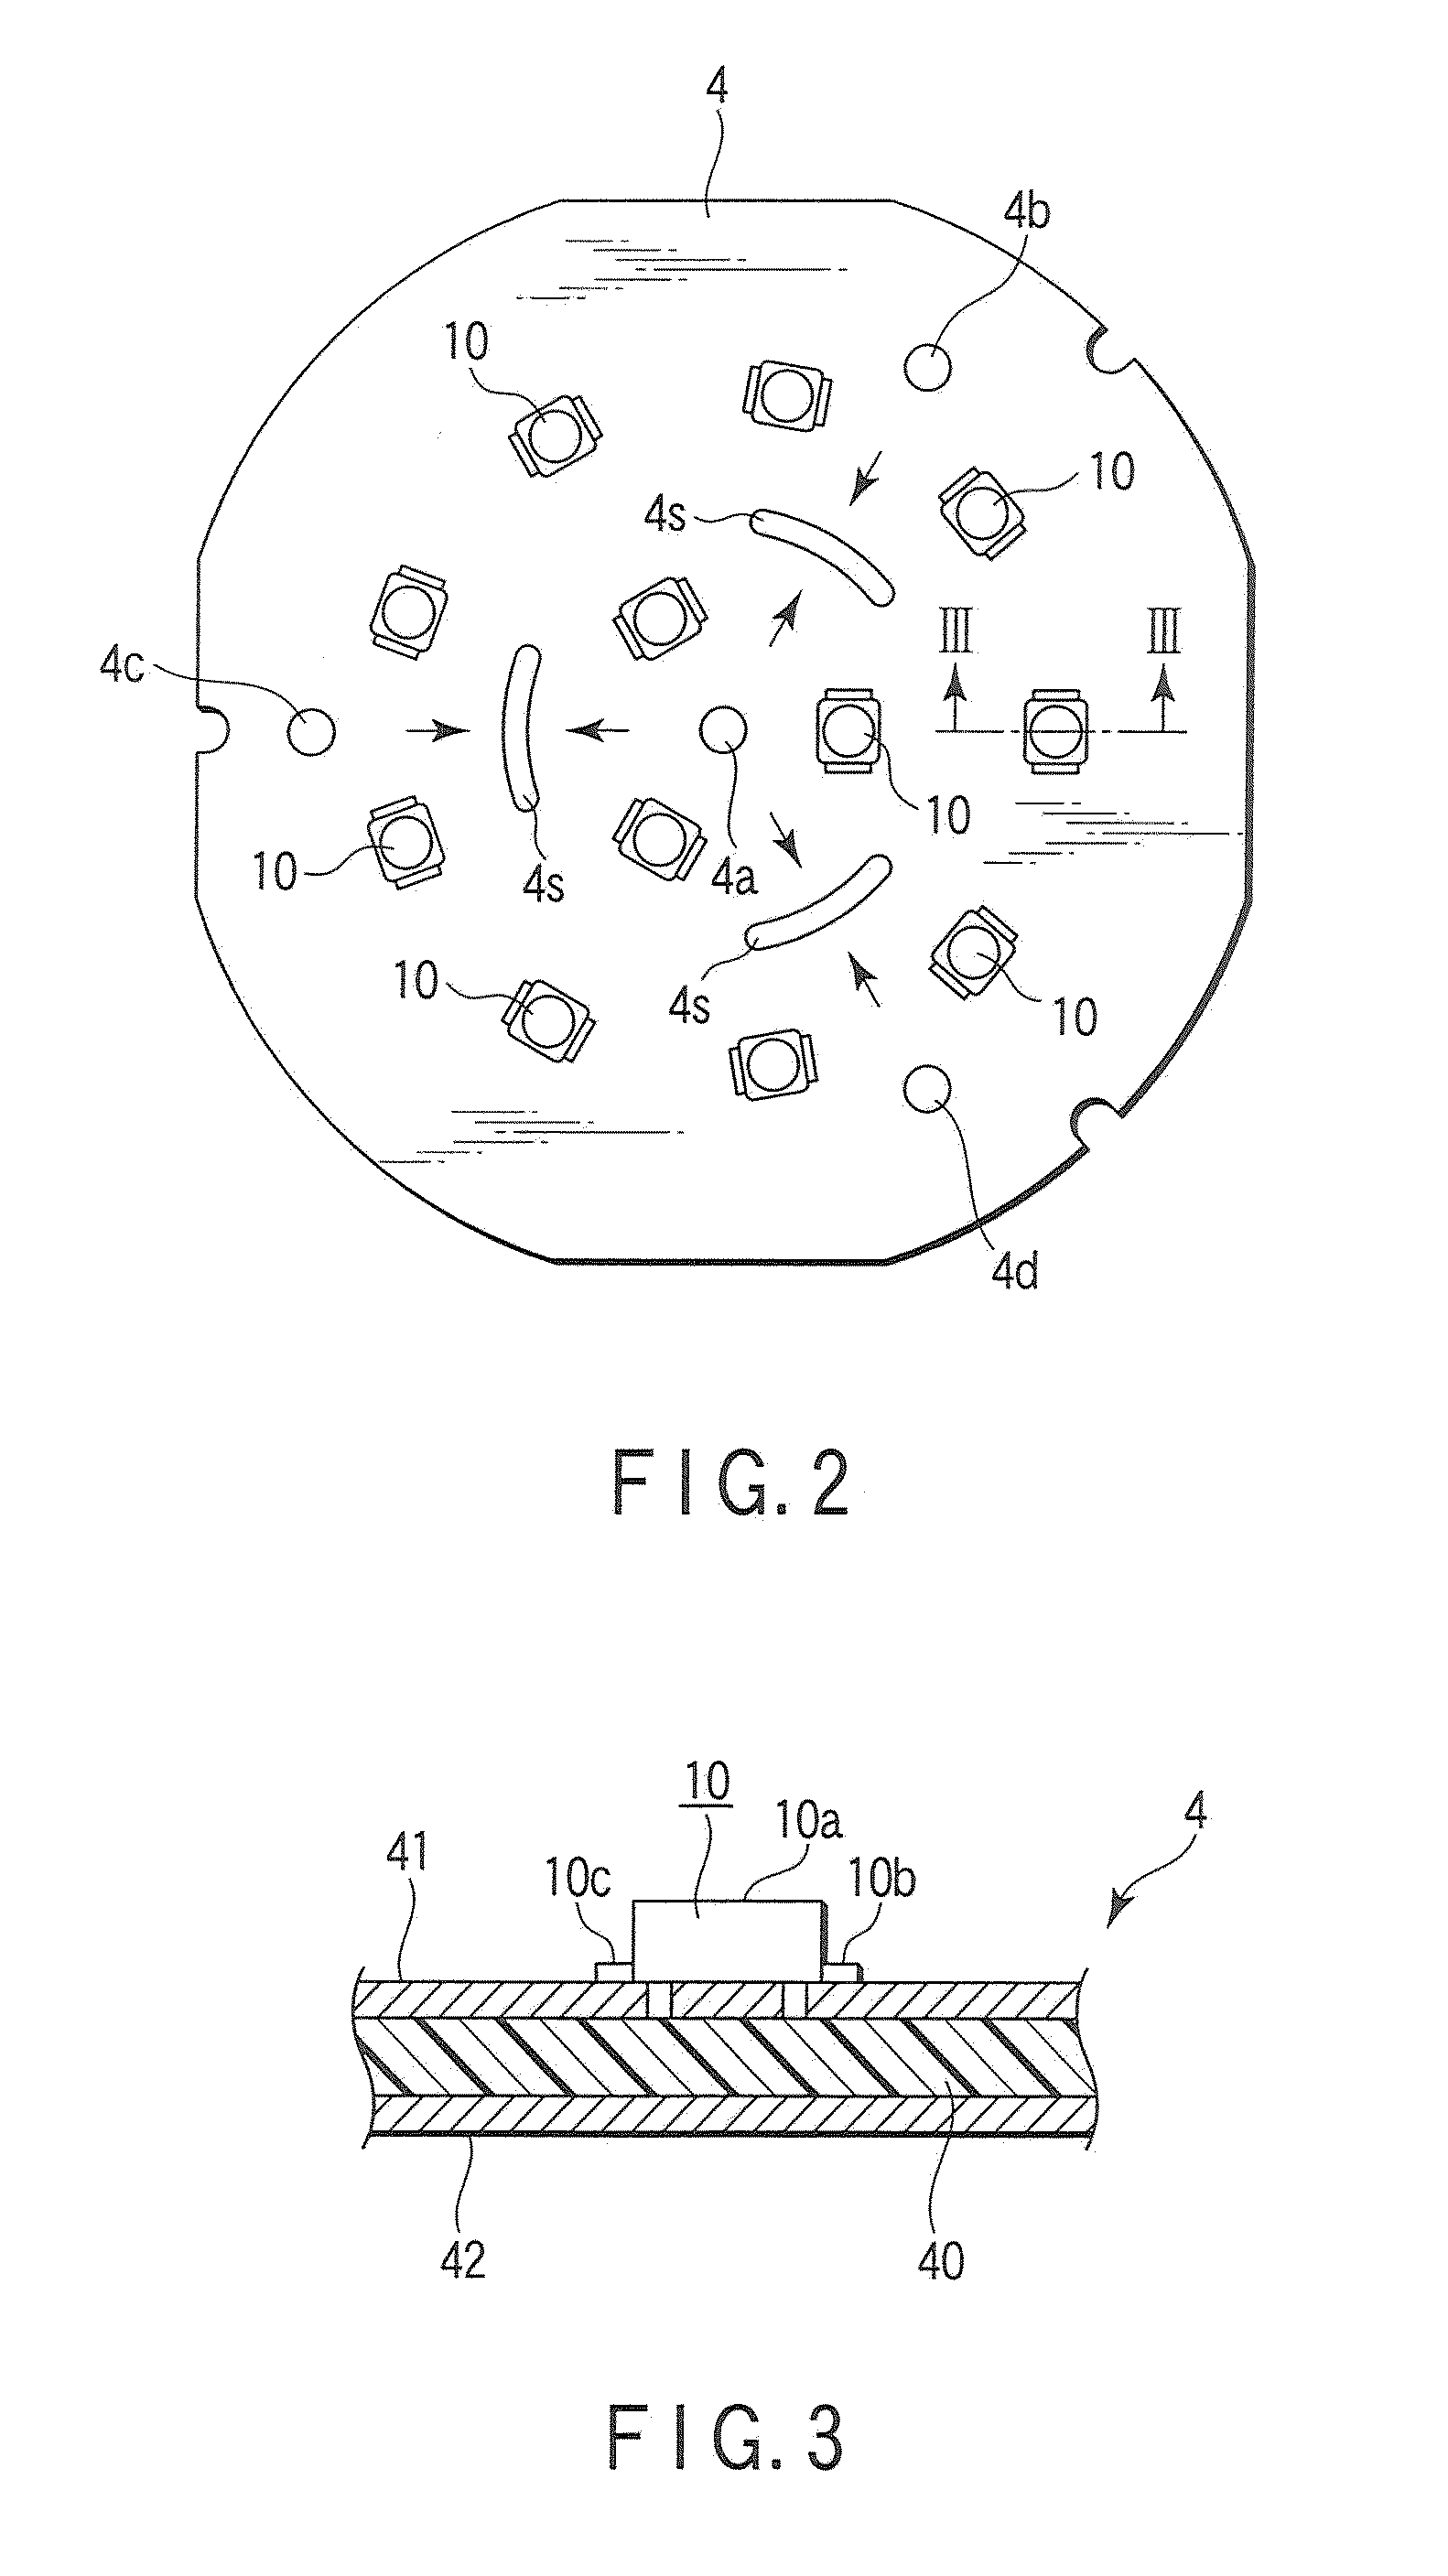 Lighting apparatus and substrate having plurality of light-emitting elements mounted thereon and incorporated in this lighting apparatus